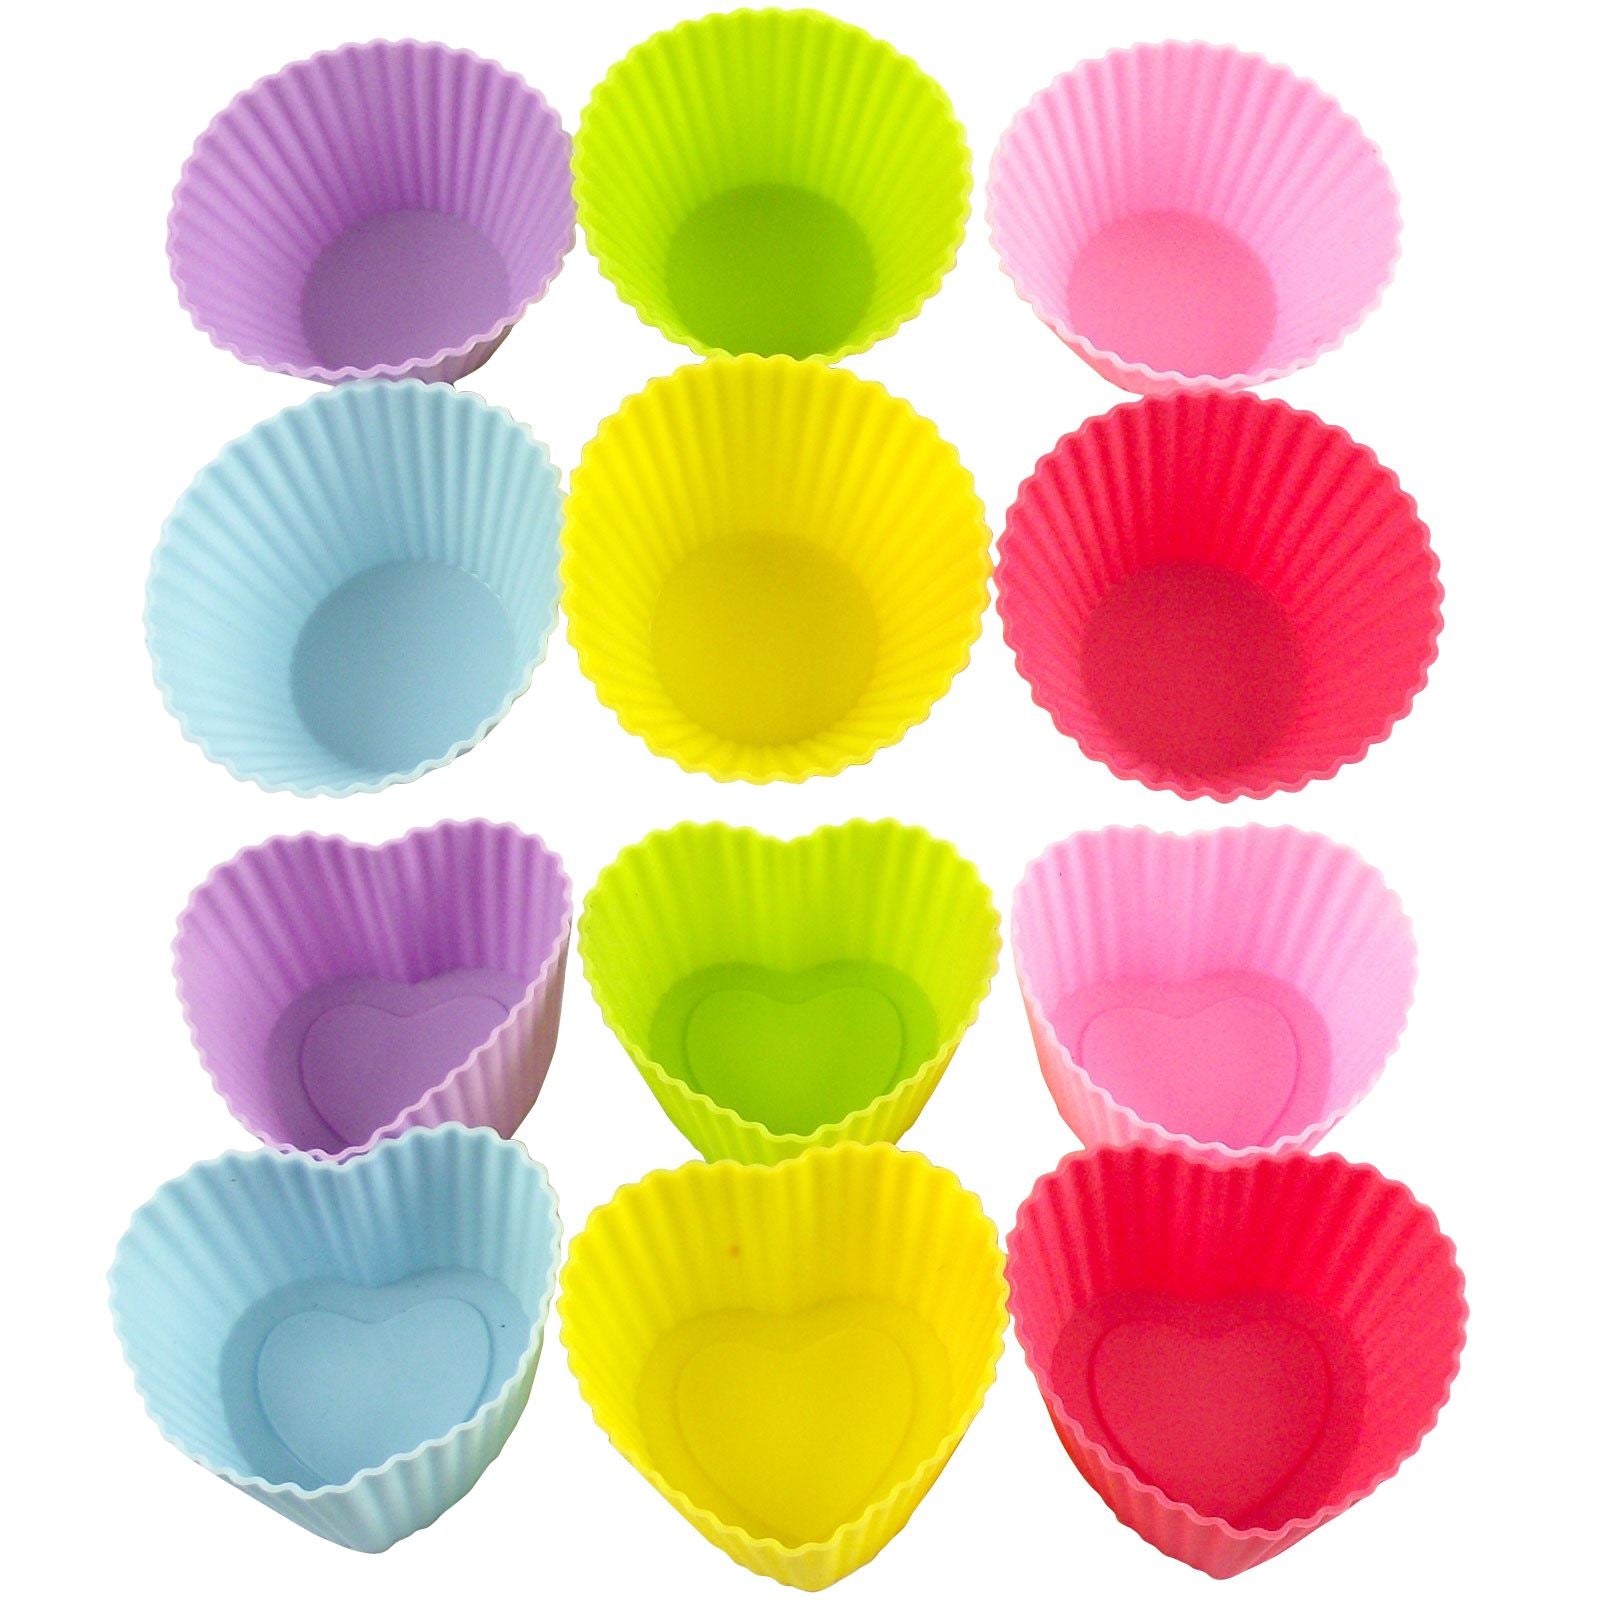 6x Silicone Cupcake Moulds